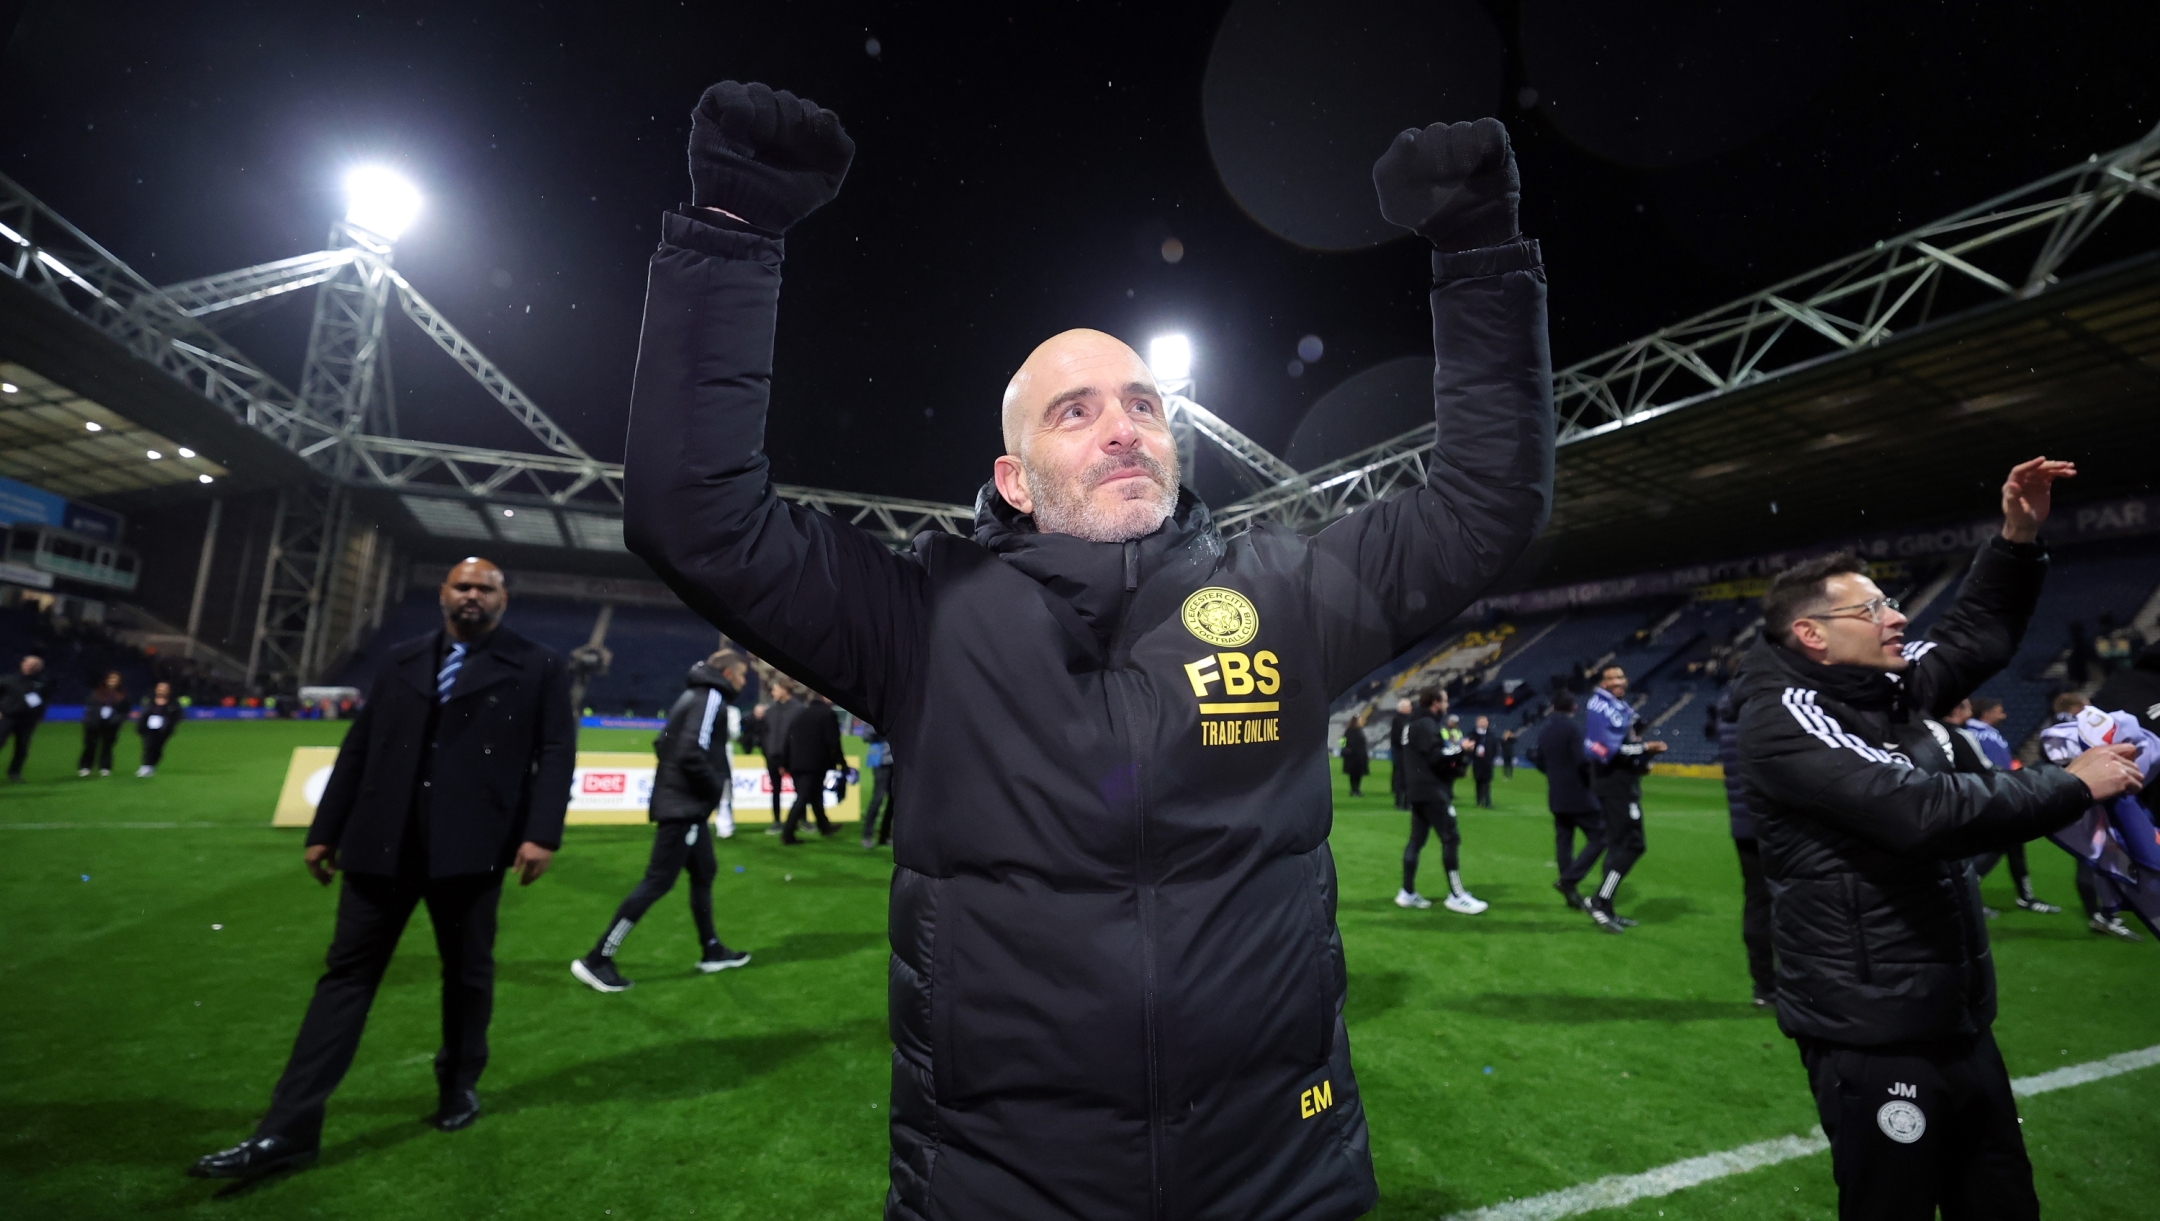 PRESTON, ENGLAND - APRIL 29: Enzo Maresca, Manager of Leicester City, celebrates victory whilst showing appreciation to the fans at full-time following the team's victory and title win following the Sky Bet Championship match between Preston North End and Leicester City at Deepdale on April 29, 2024 in Preston, England. (Photo by Alex Livesey/Getty Images) (Photo by Alex Livesey/Getty Images)